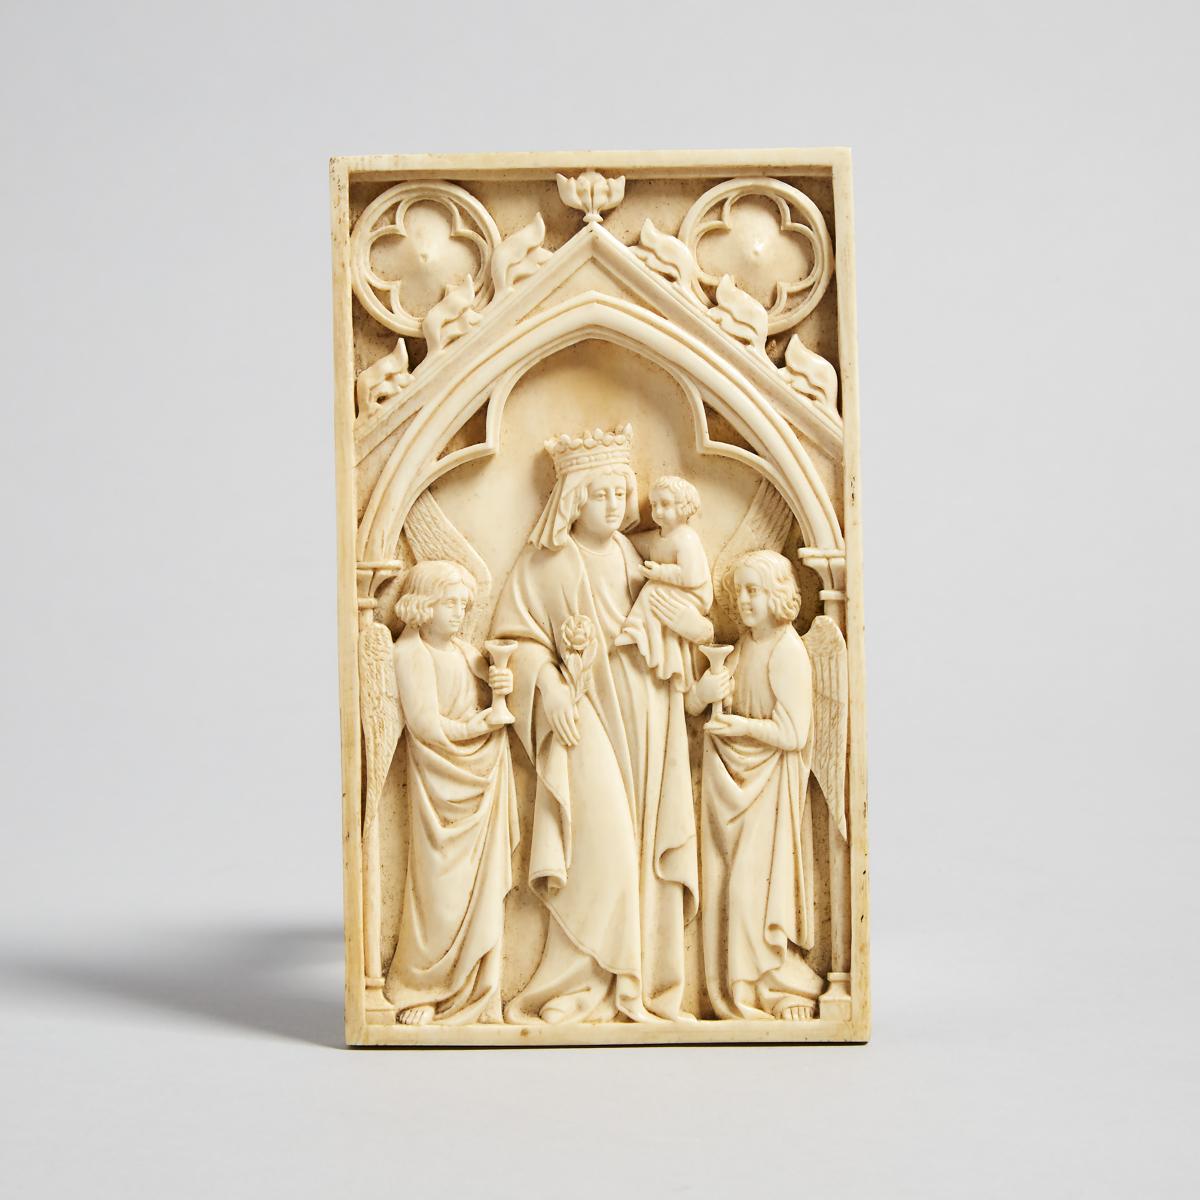 French Gothic Relief Carved Ivory Plaque, 18th century or earlier, 5.8 x 3.4 in — 14.7 x 8.6 cm